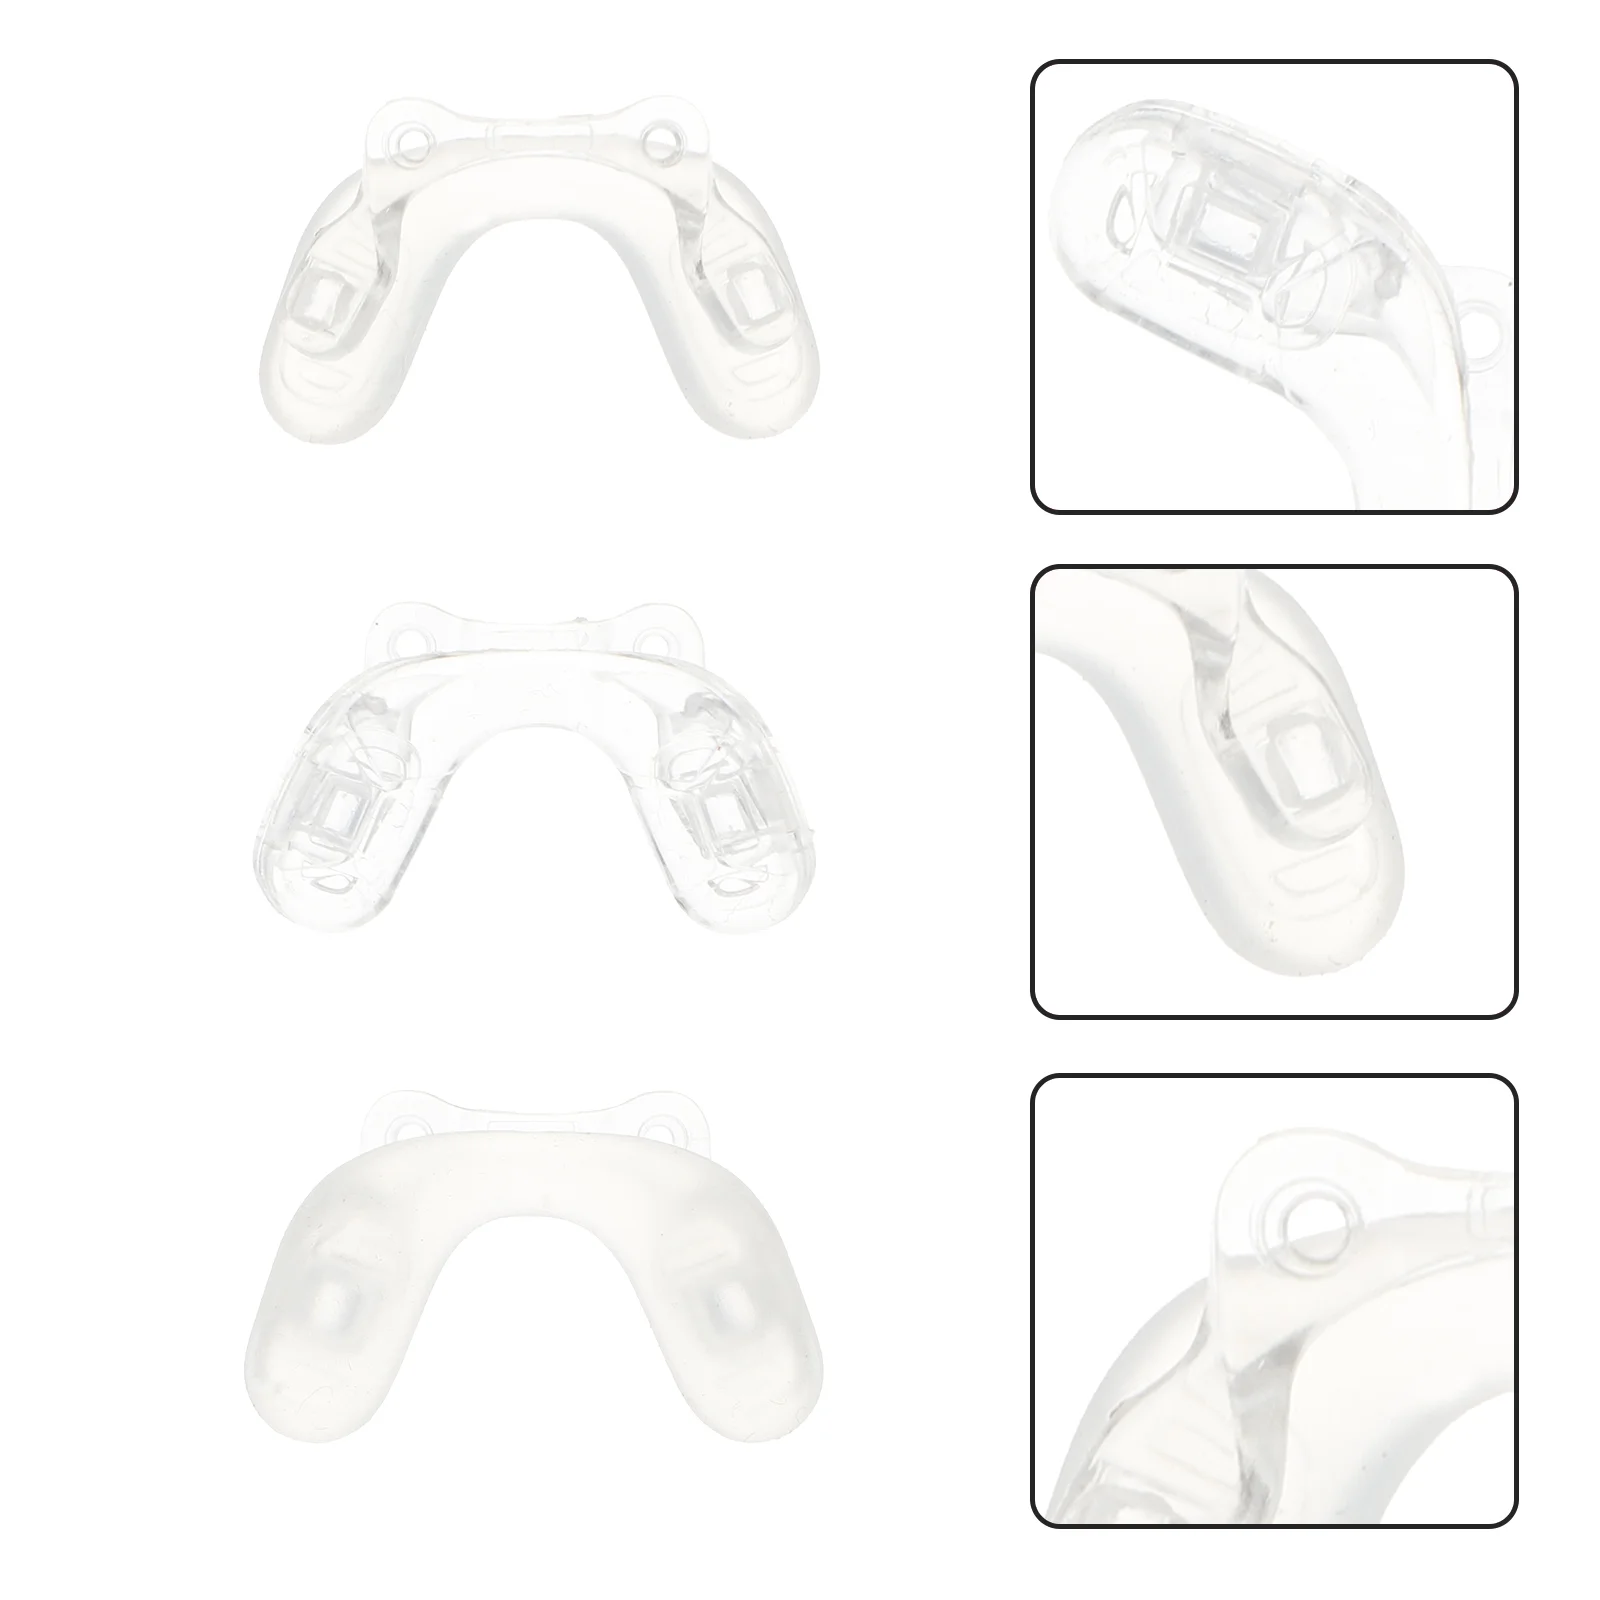 

Nose Pads Glasses Silicone Pad Eyeglasses Bridge Eyeglass Strap Shaped U Support Piece Anti Eyewear Accessories Clear Grips